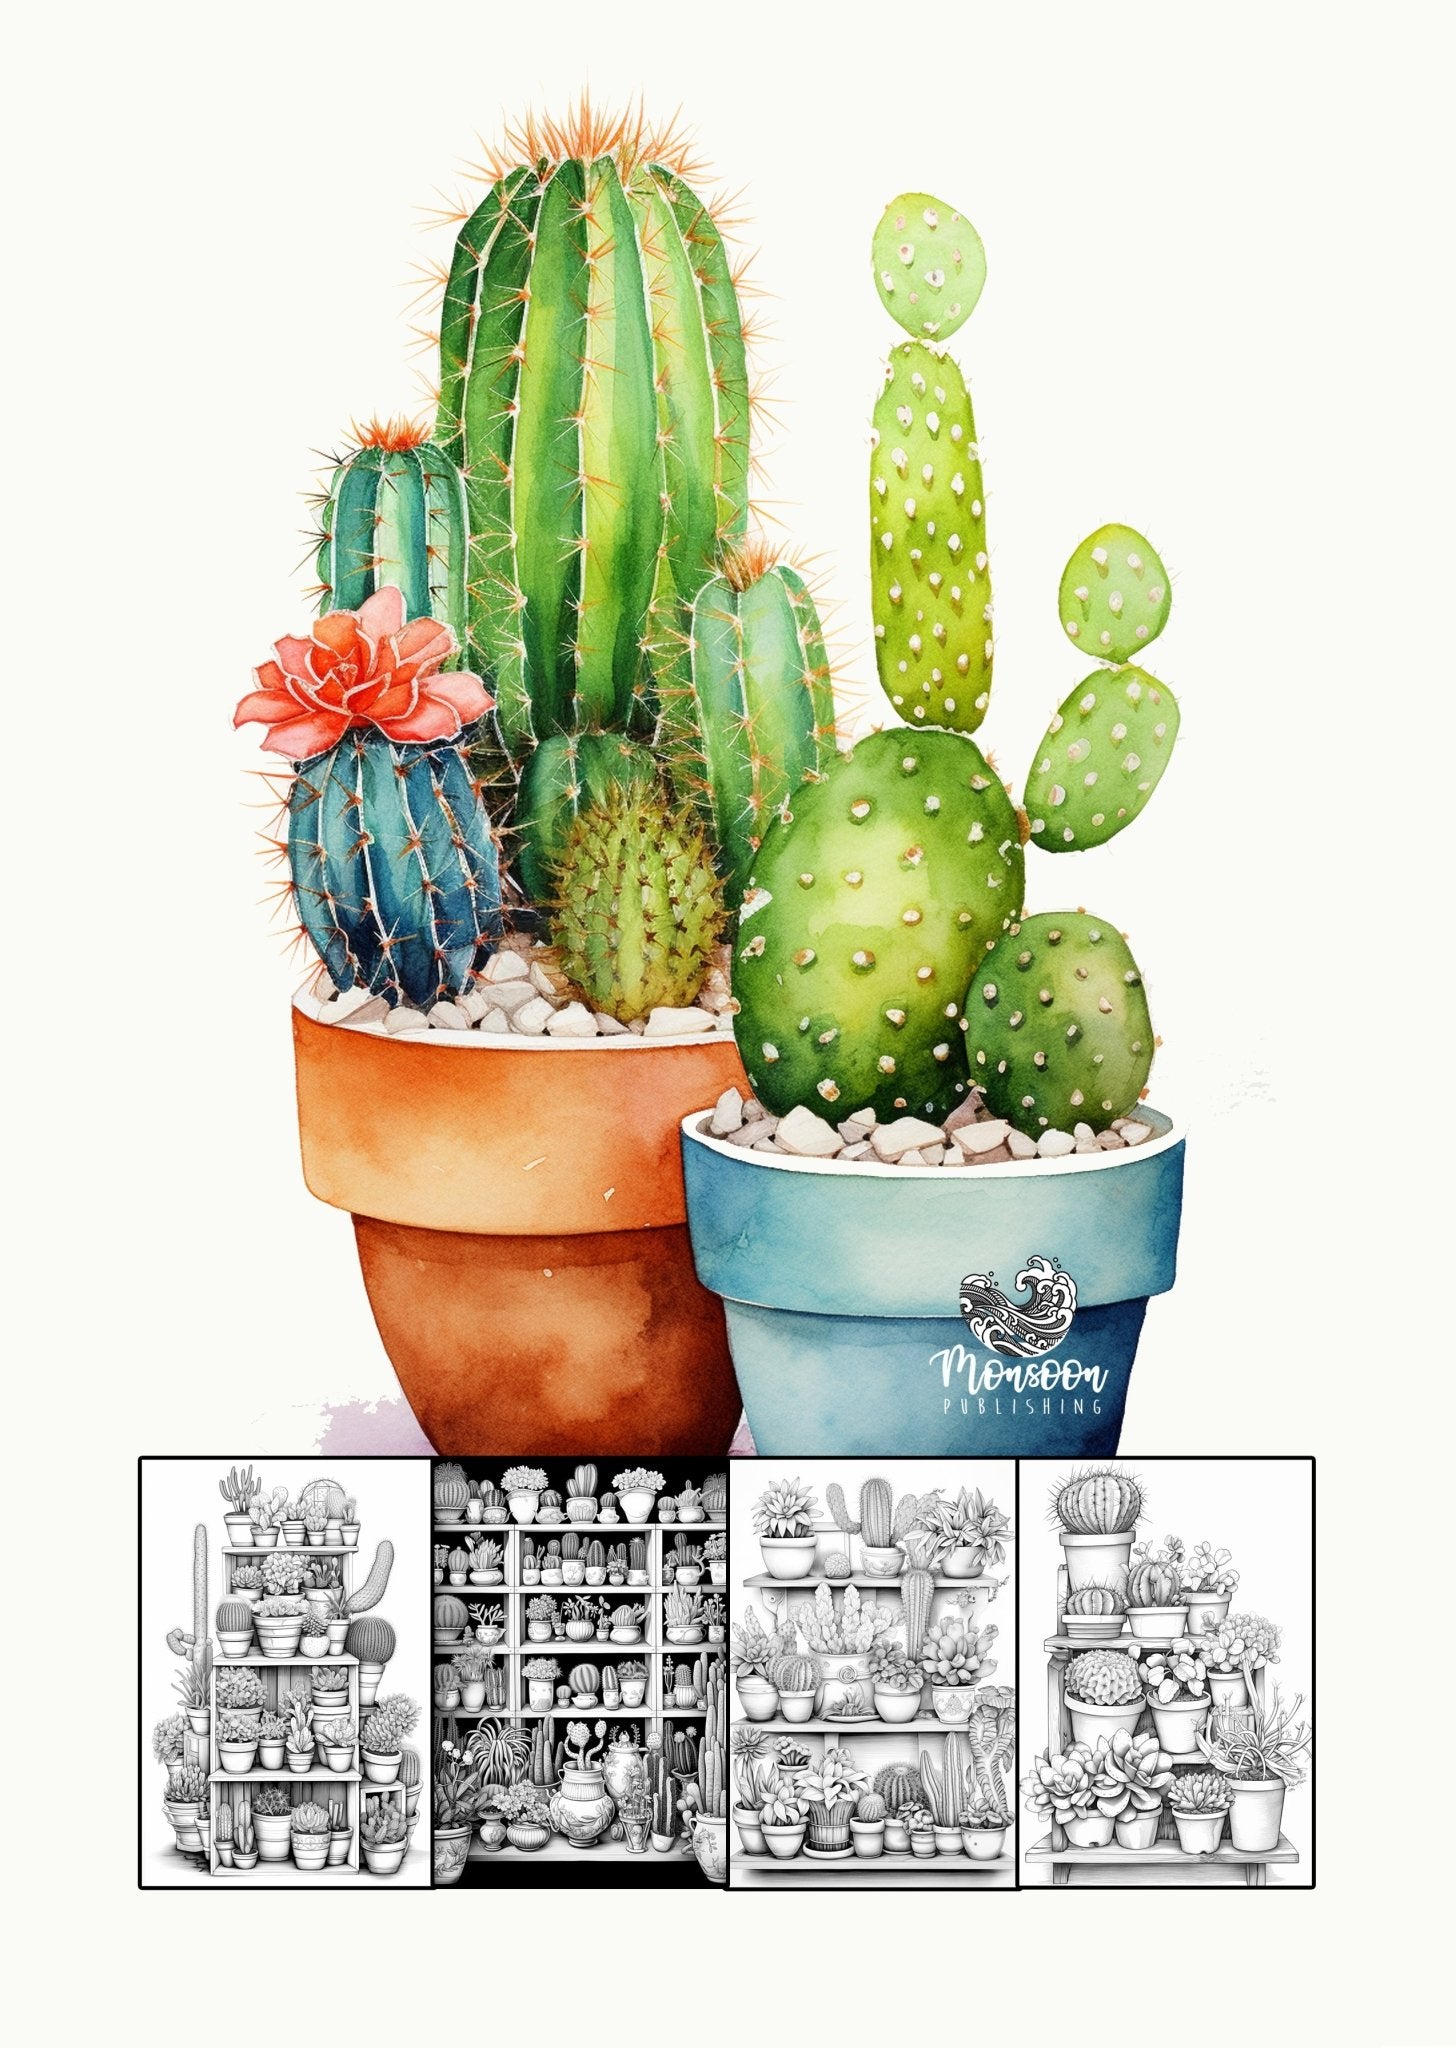 Cactus in a Pot Coloring Book (Printbook) - Monsoon Publishing USA